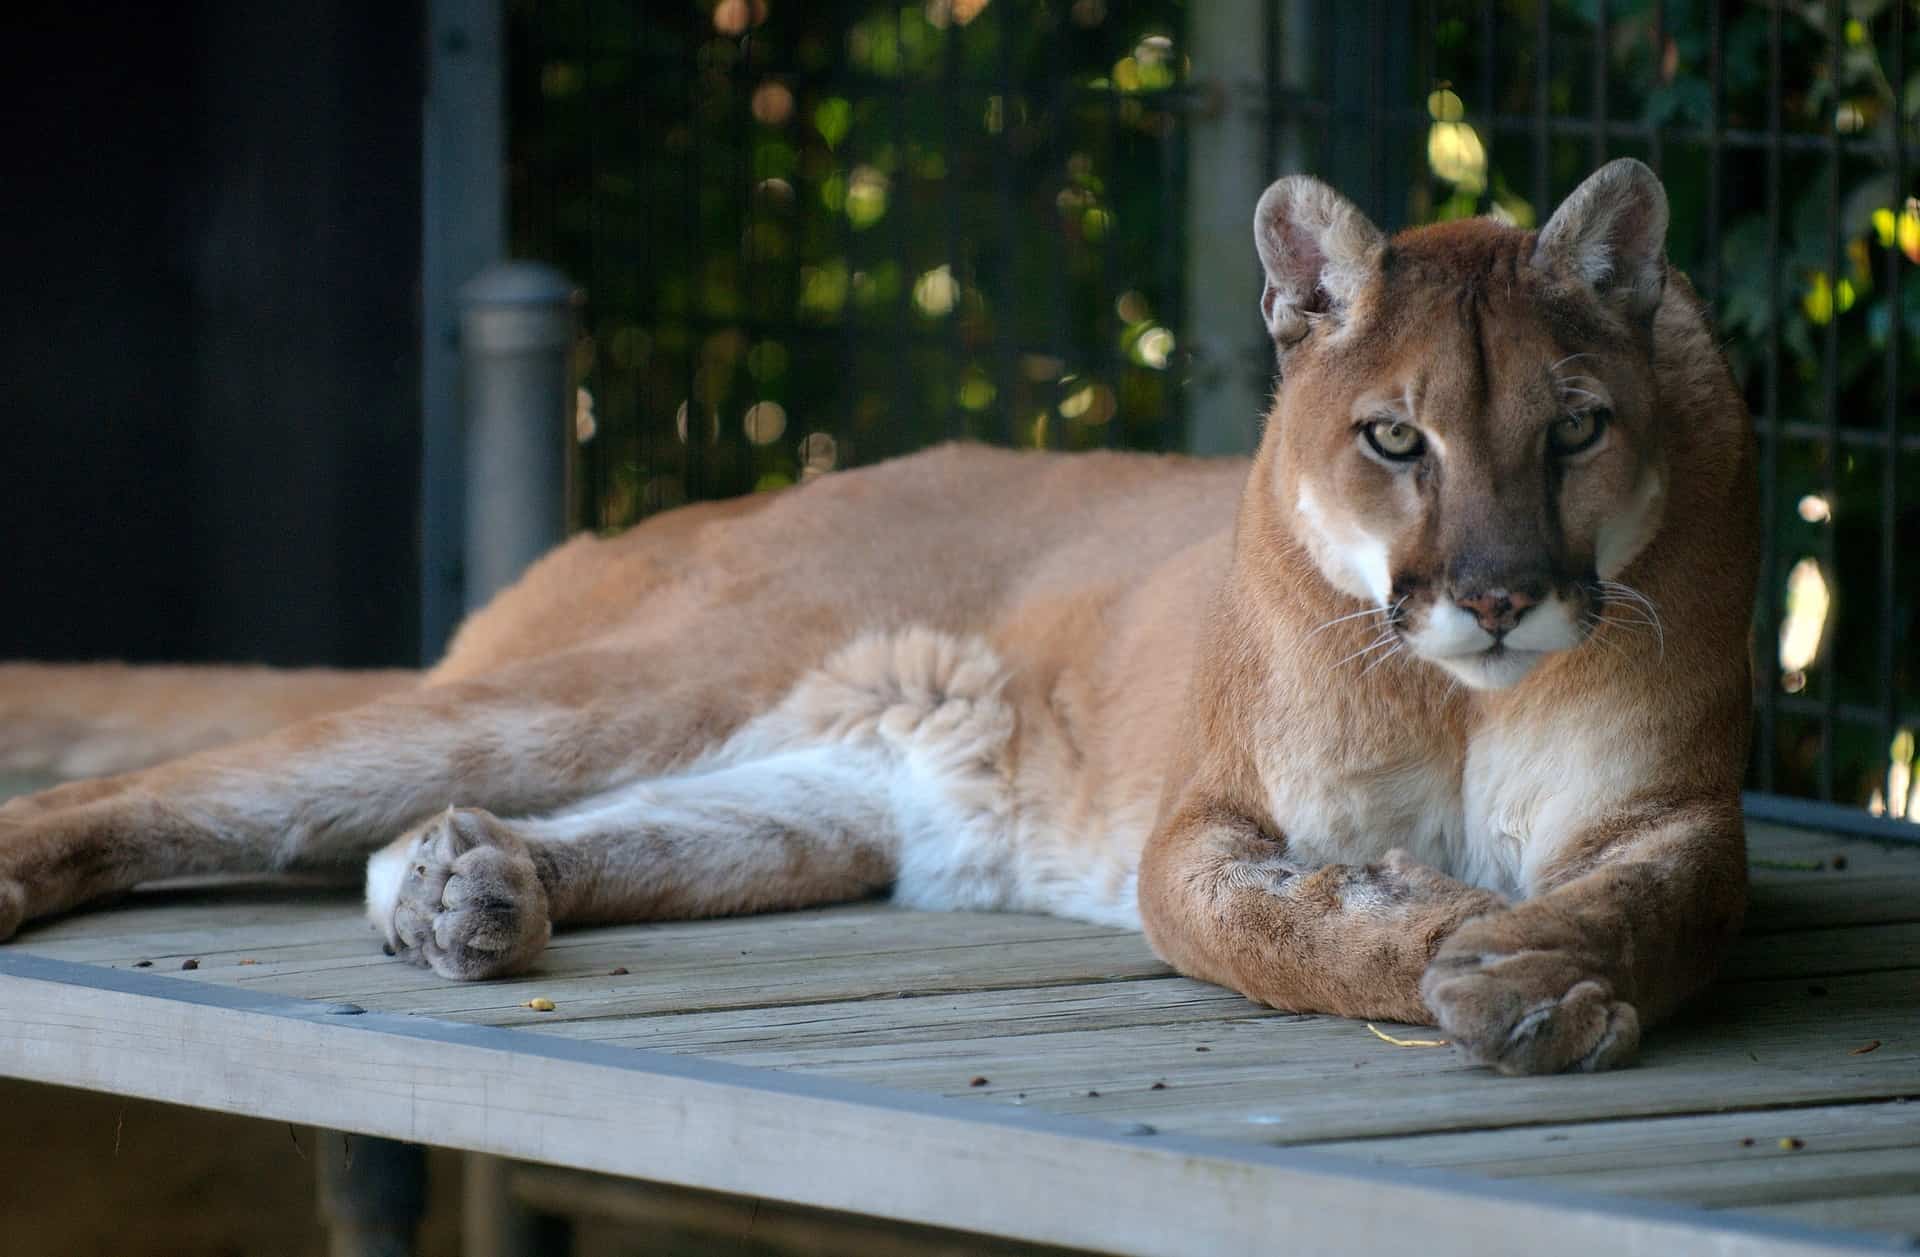 Facts about Cougars: Ability, Behavior, Diet & More